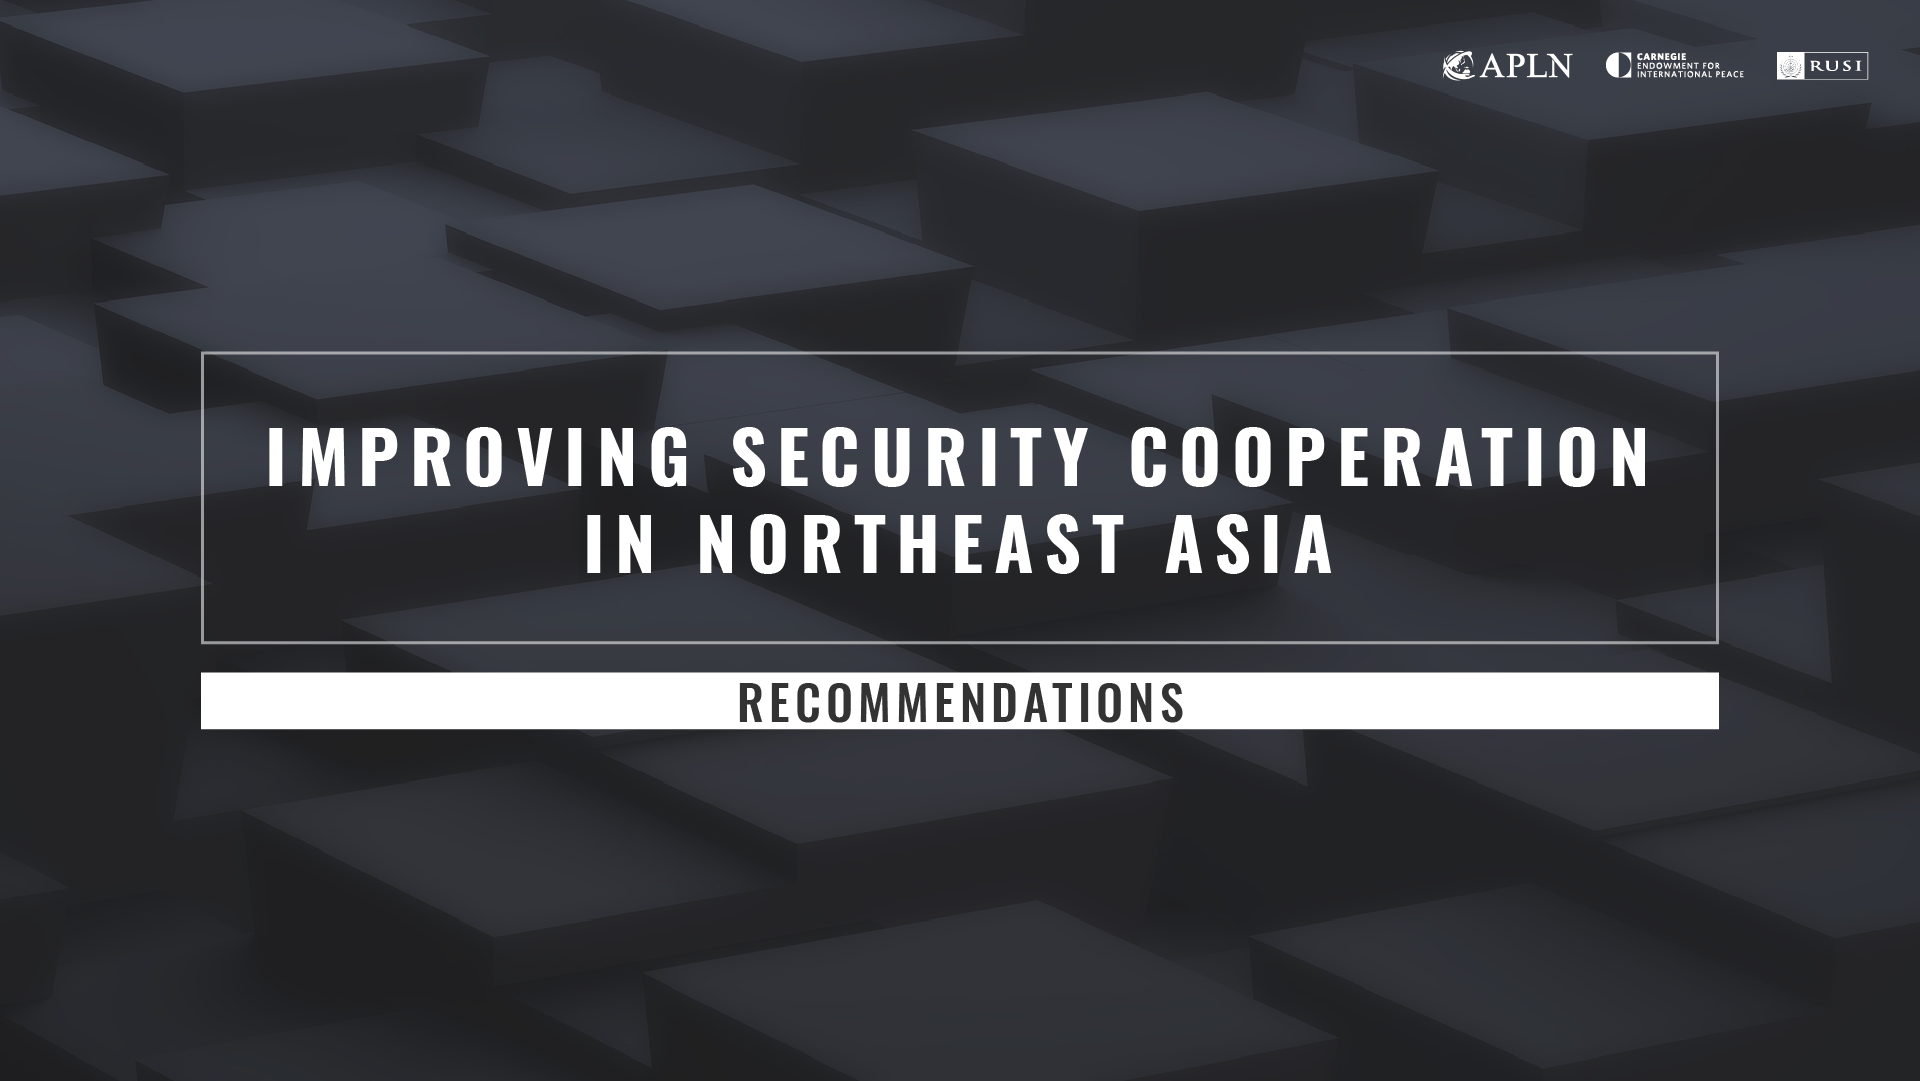 Policymakers and Experts Endorse Recommendations for Security Cooperation